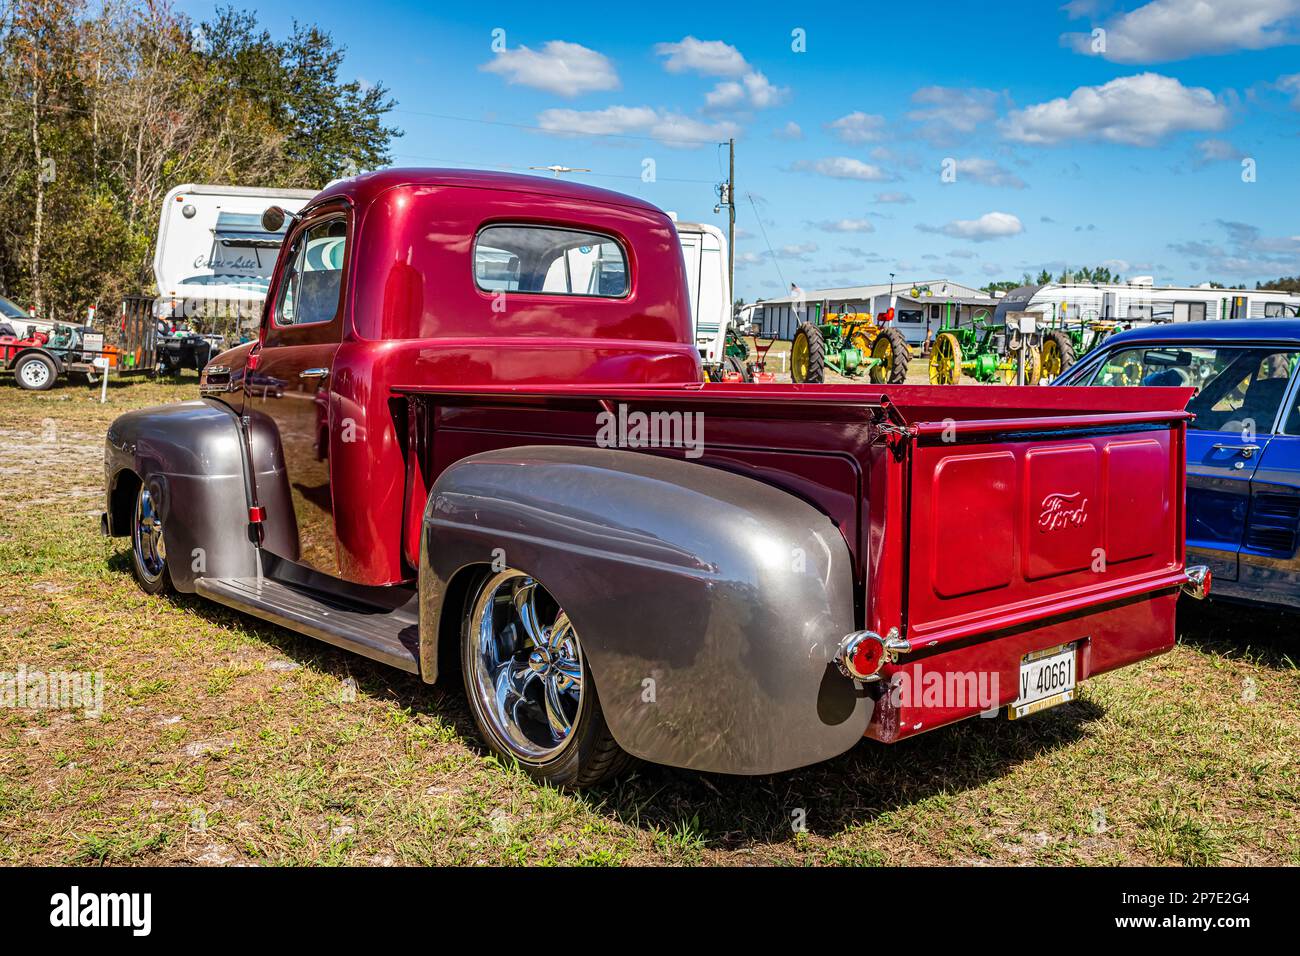 Fort Meade, FL - February 24, 2022: High perspective rear corner view of a 1948 Ford F1 Pickup Truck at a local car show. Stock Photo